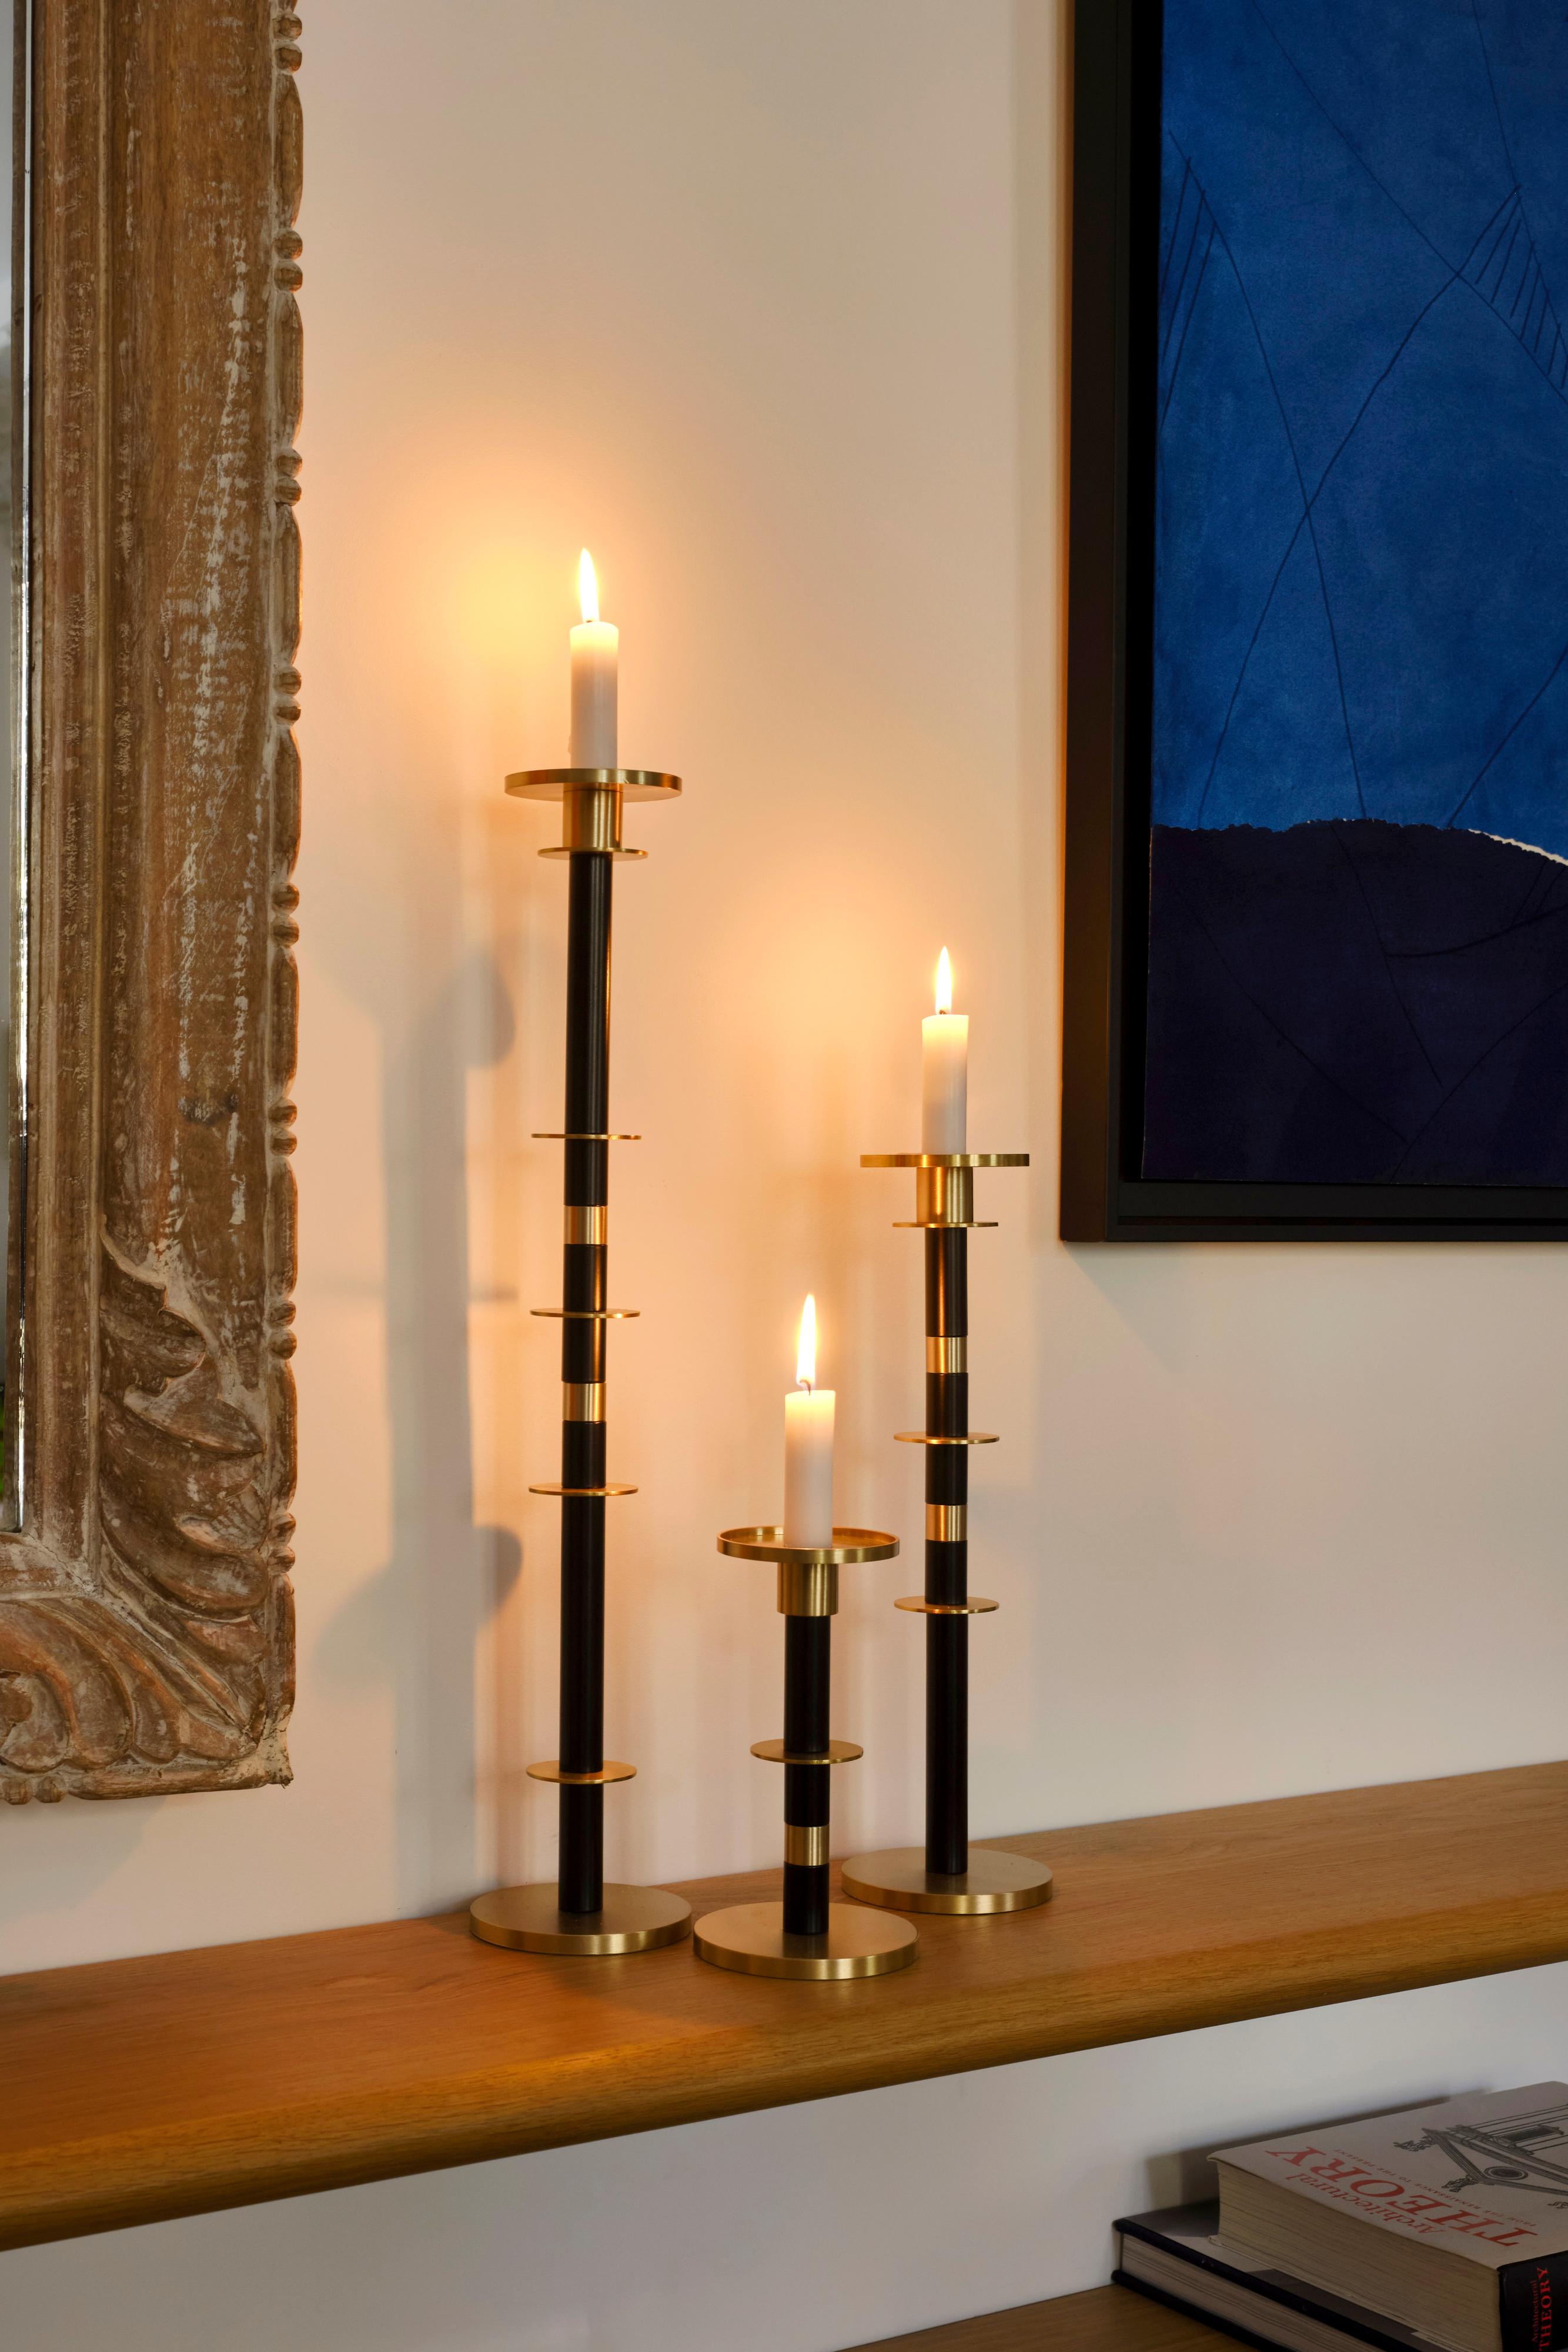 The contrast between the raw metals and the fluidity of the wax defines the iconic design of Marine Breynaert's candlesticks. Each piece is a minimal architectural composition, blending shapes, sizes, and colors in a captivating manner. Whether